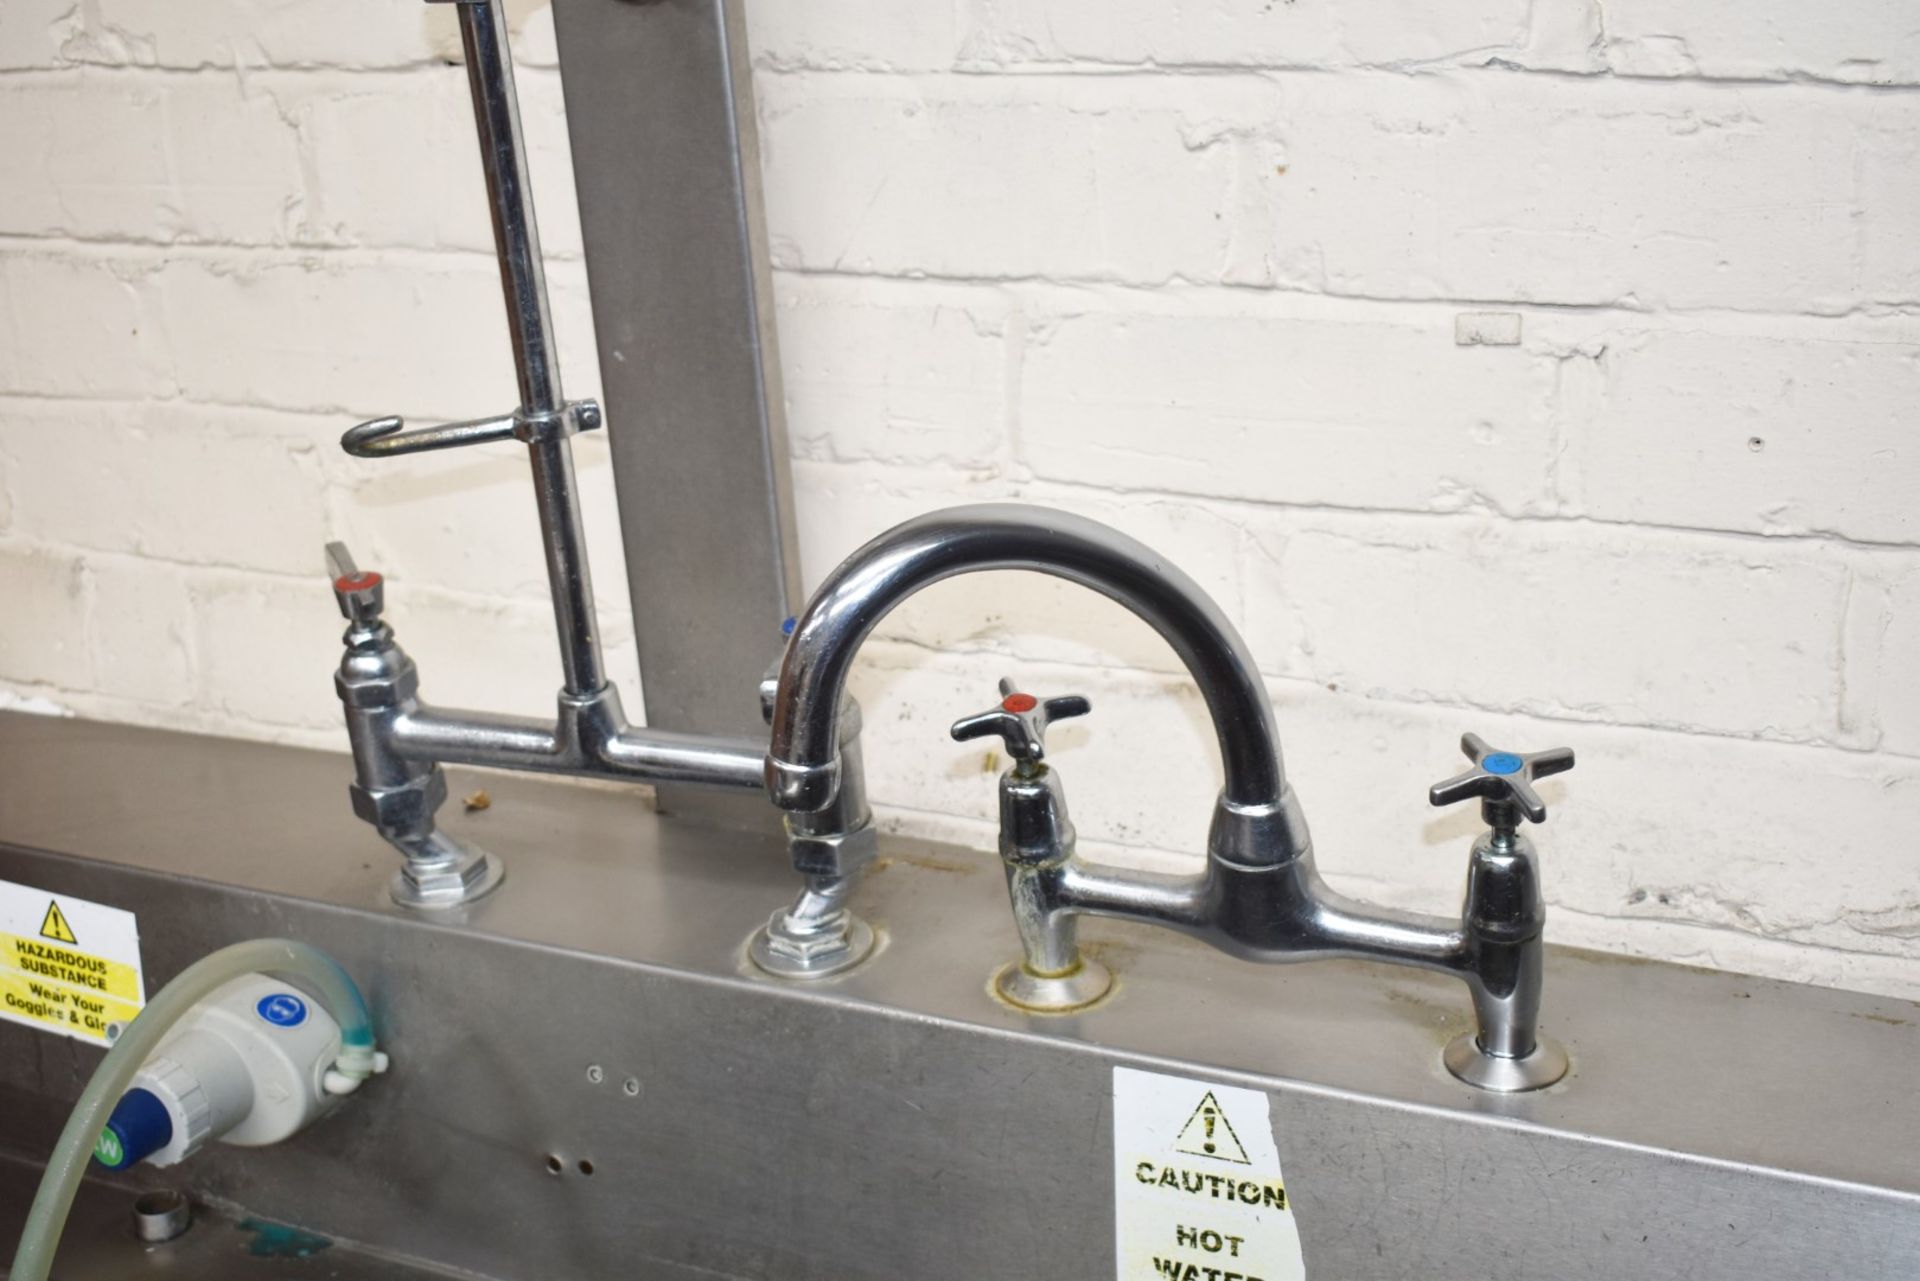 1 x Commercial Kitchen Wash Station With Single Large Deep Sink Bowls, Mixer Taps, Spray Wash Gun, - Image 6 of 7